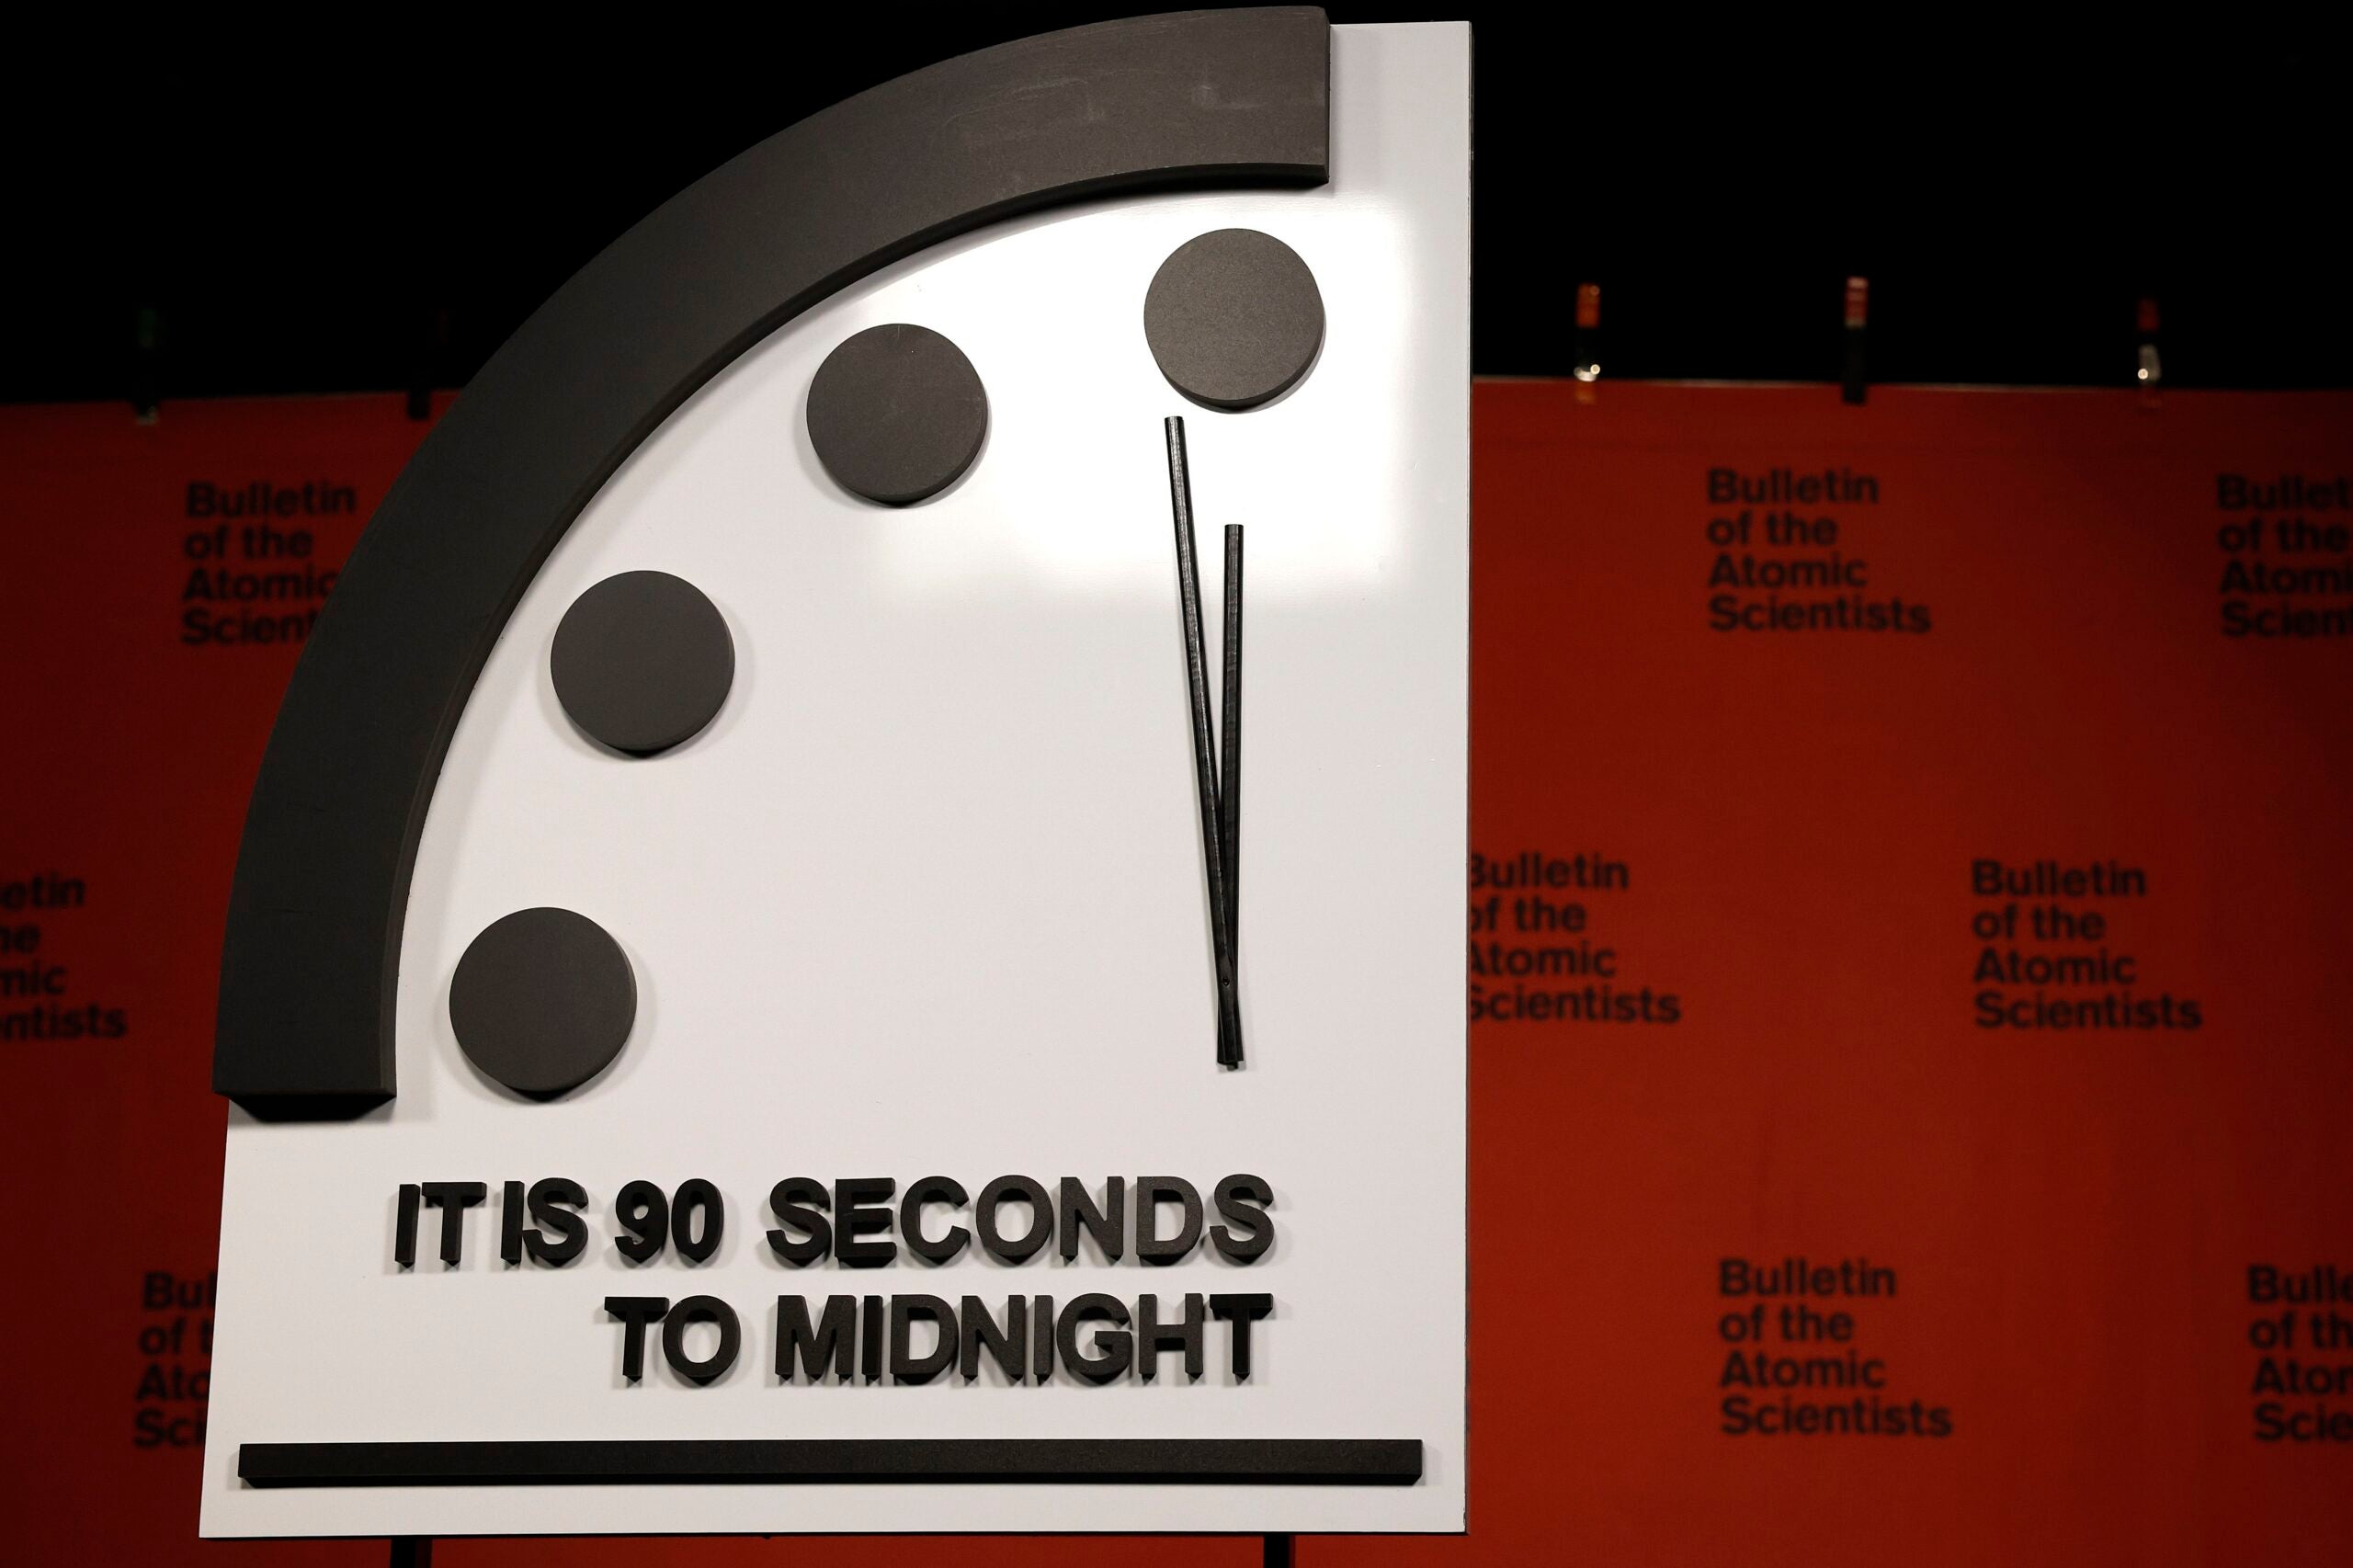 alt = the 2023 Doomsday Clock is set at 90 seconds to midnight.